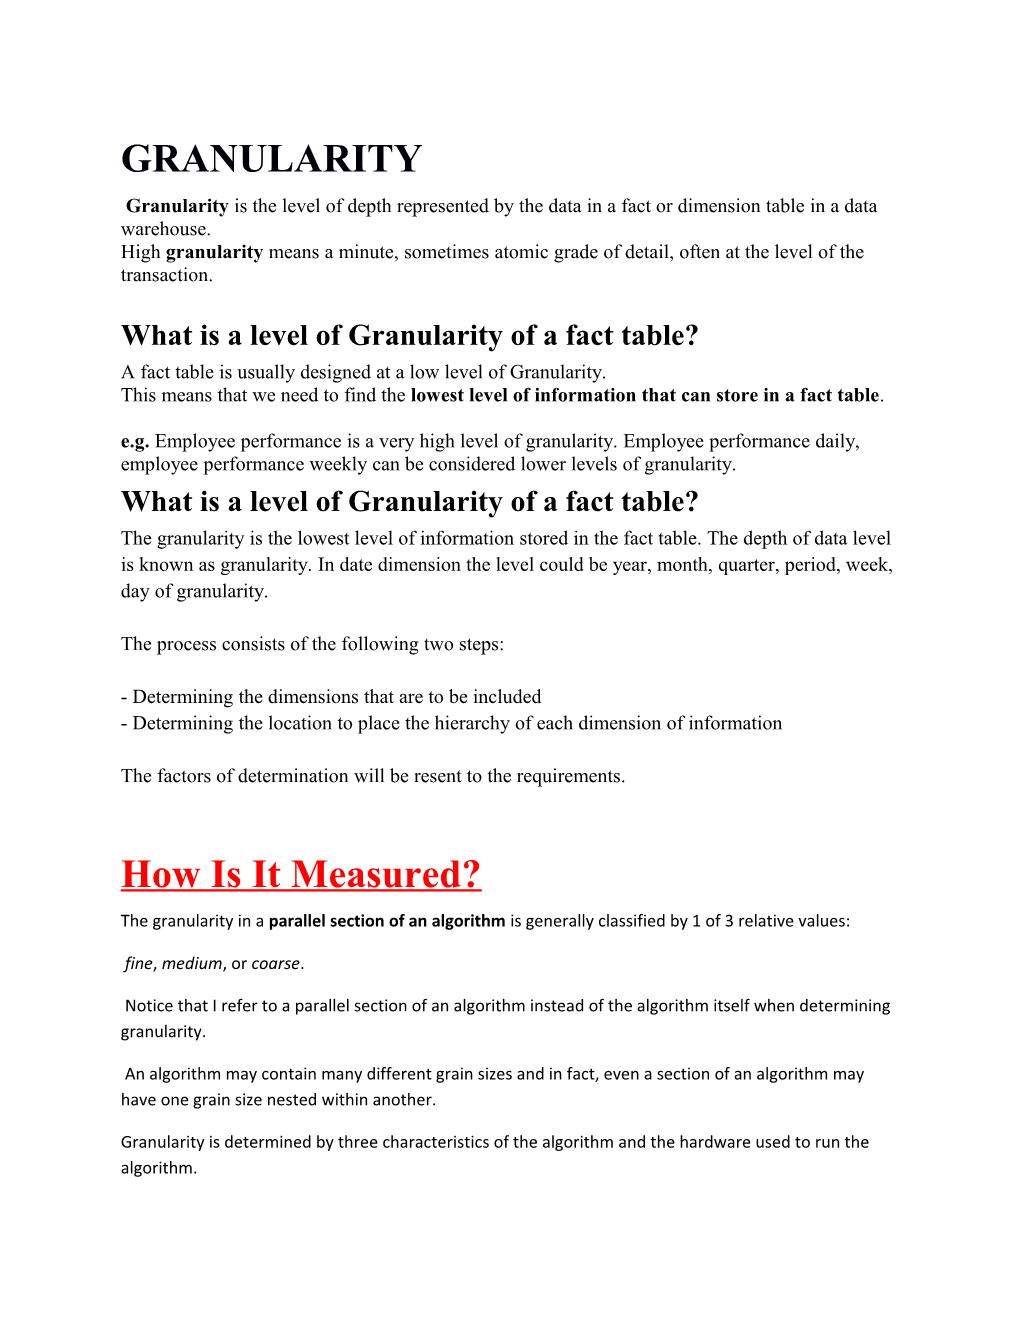 What Is a Level of Granularity of a Fact Table?